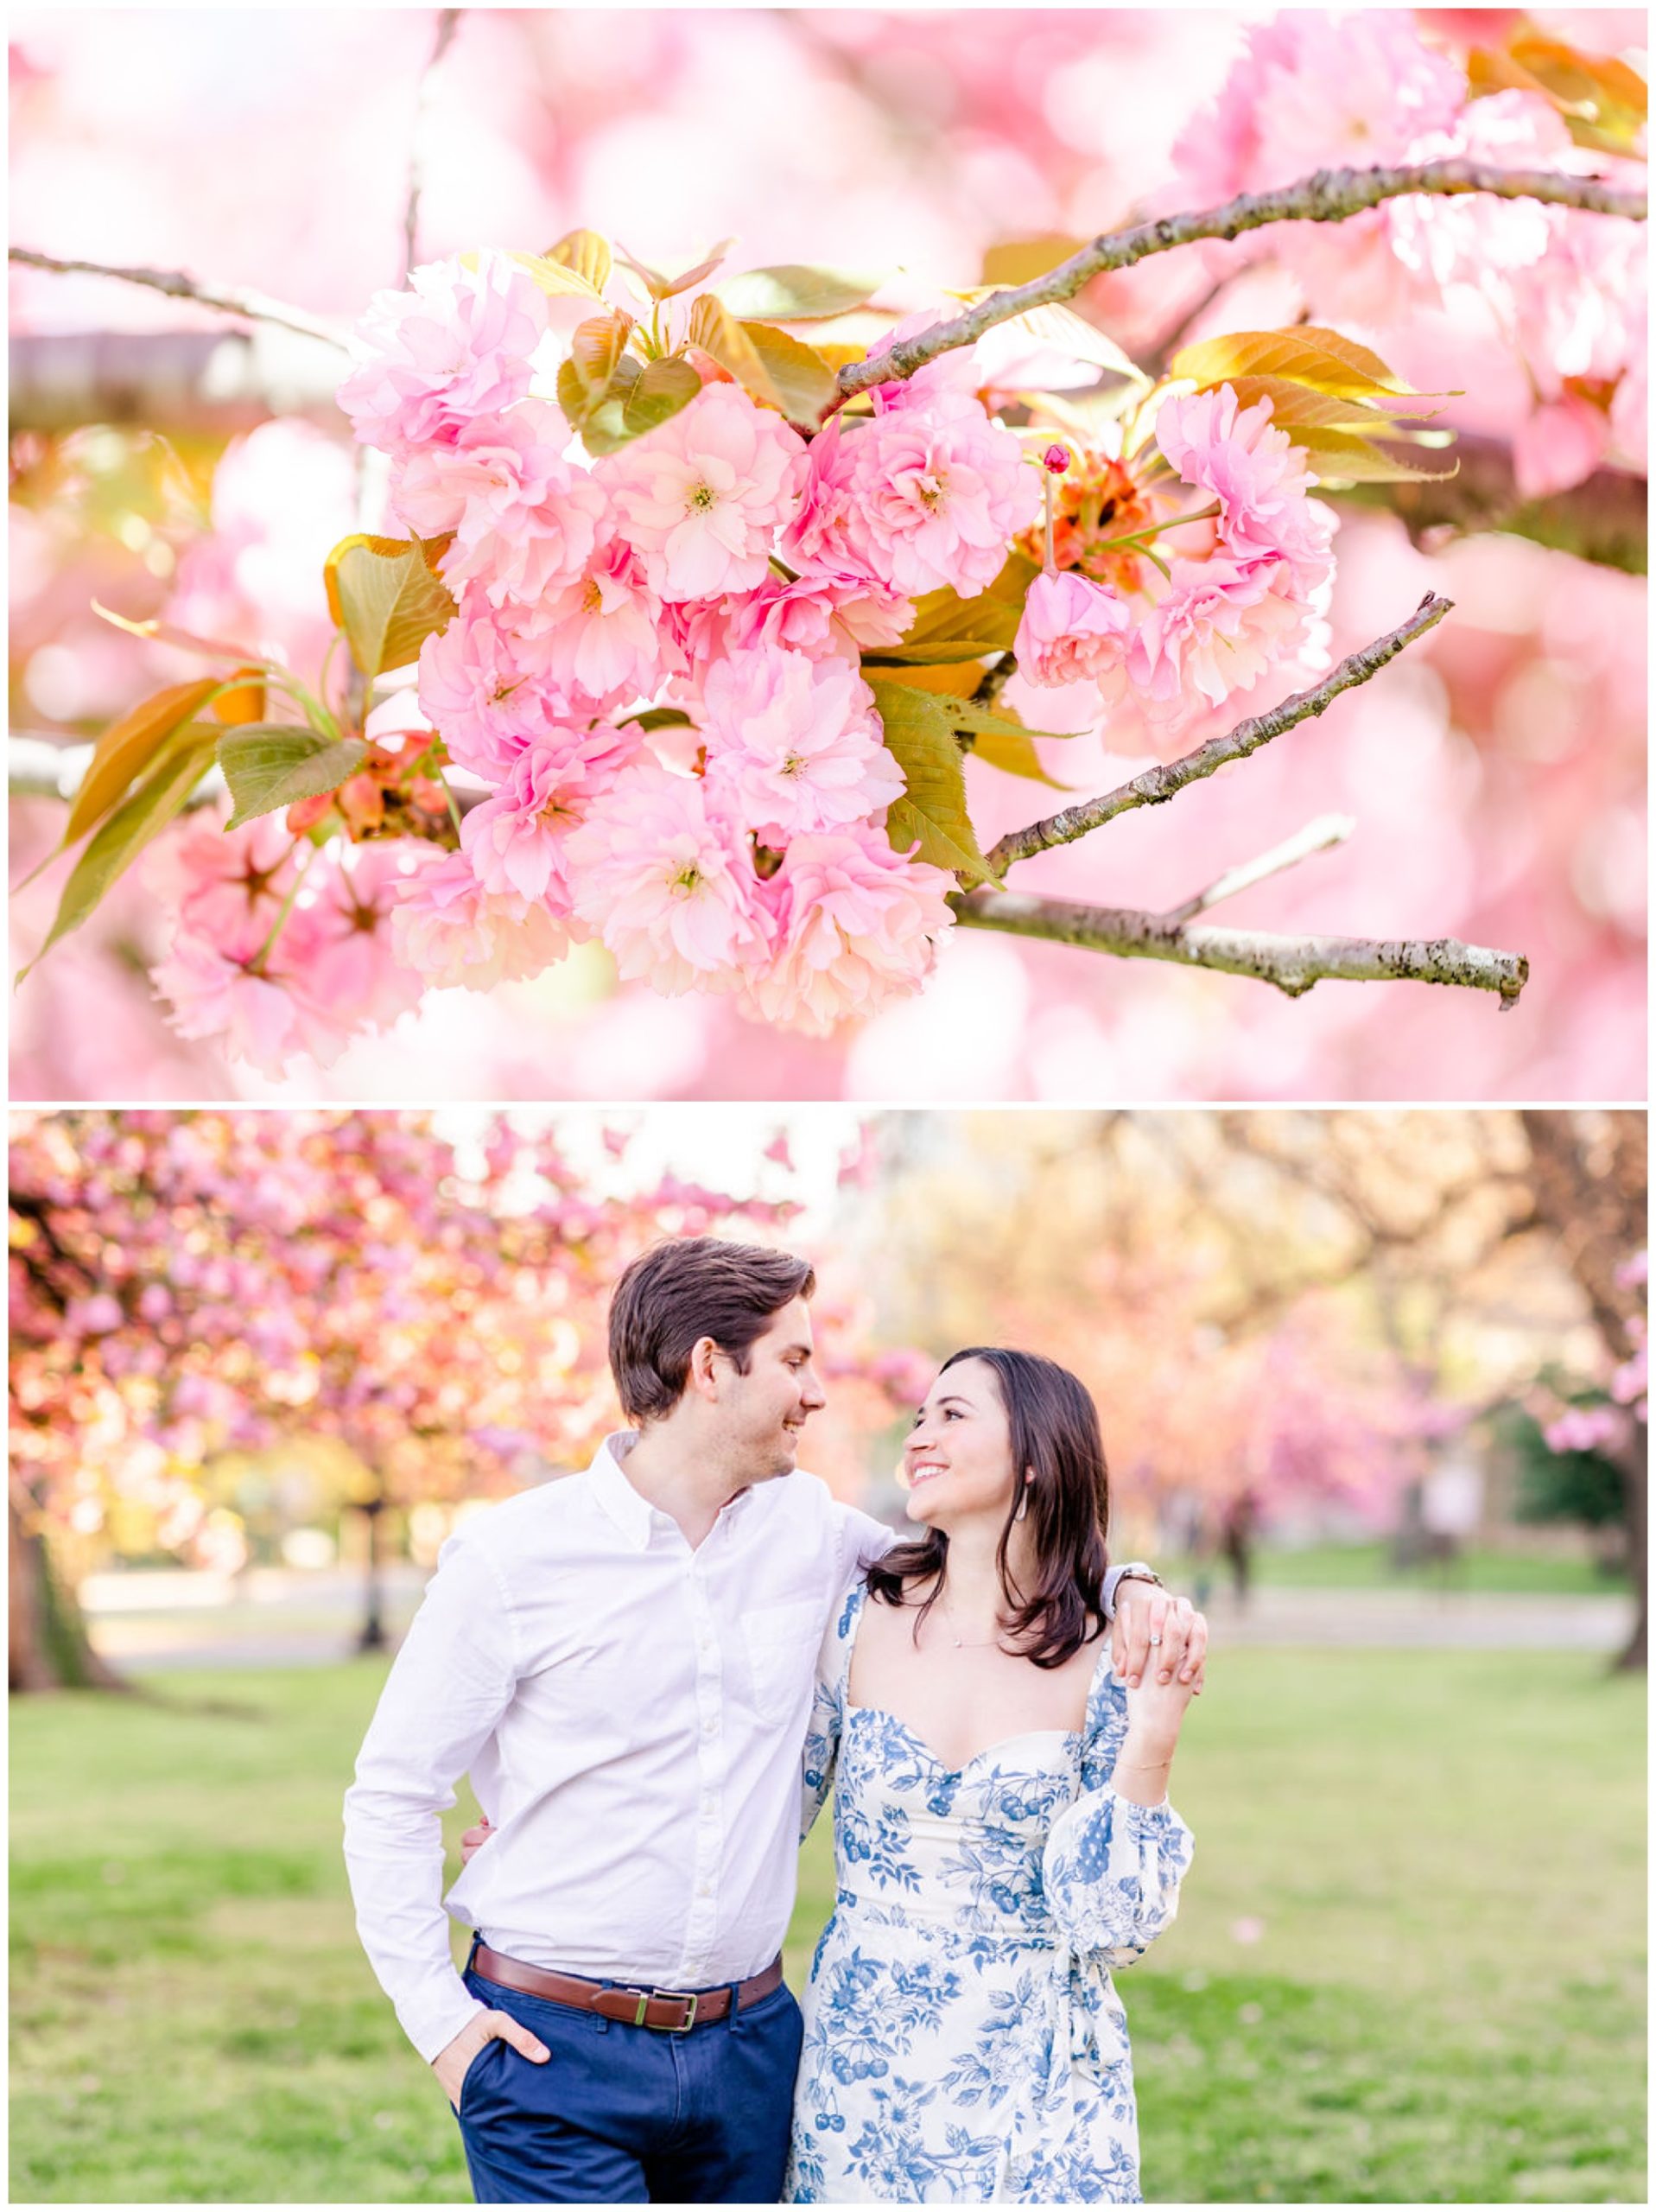 kwanzan cherry blossom photos, D.C. cherry blossoms, alternative cherry blossoms, flowering trees, bright pink blossoms, fluffy pink blossoms, spring portraits, spring photo ideas, Rachel E.H. Photography, couple looking at each other, couple in cherry blossom field, large cluster of cherry blossoms on gray branch